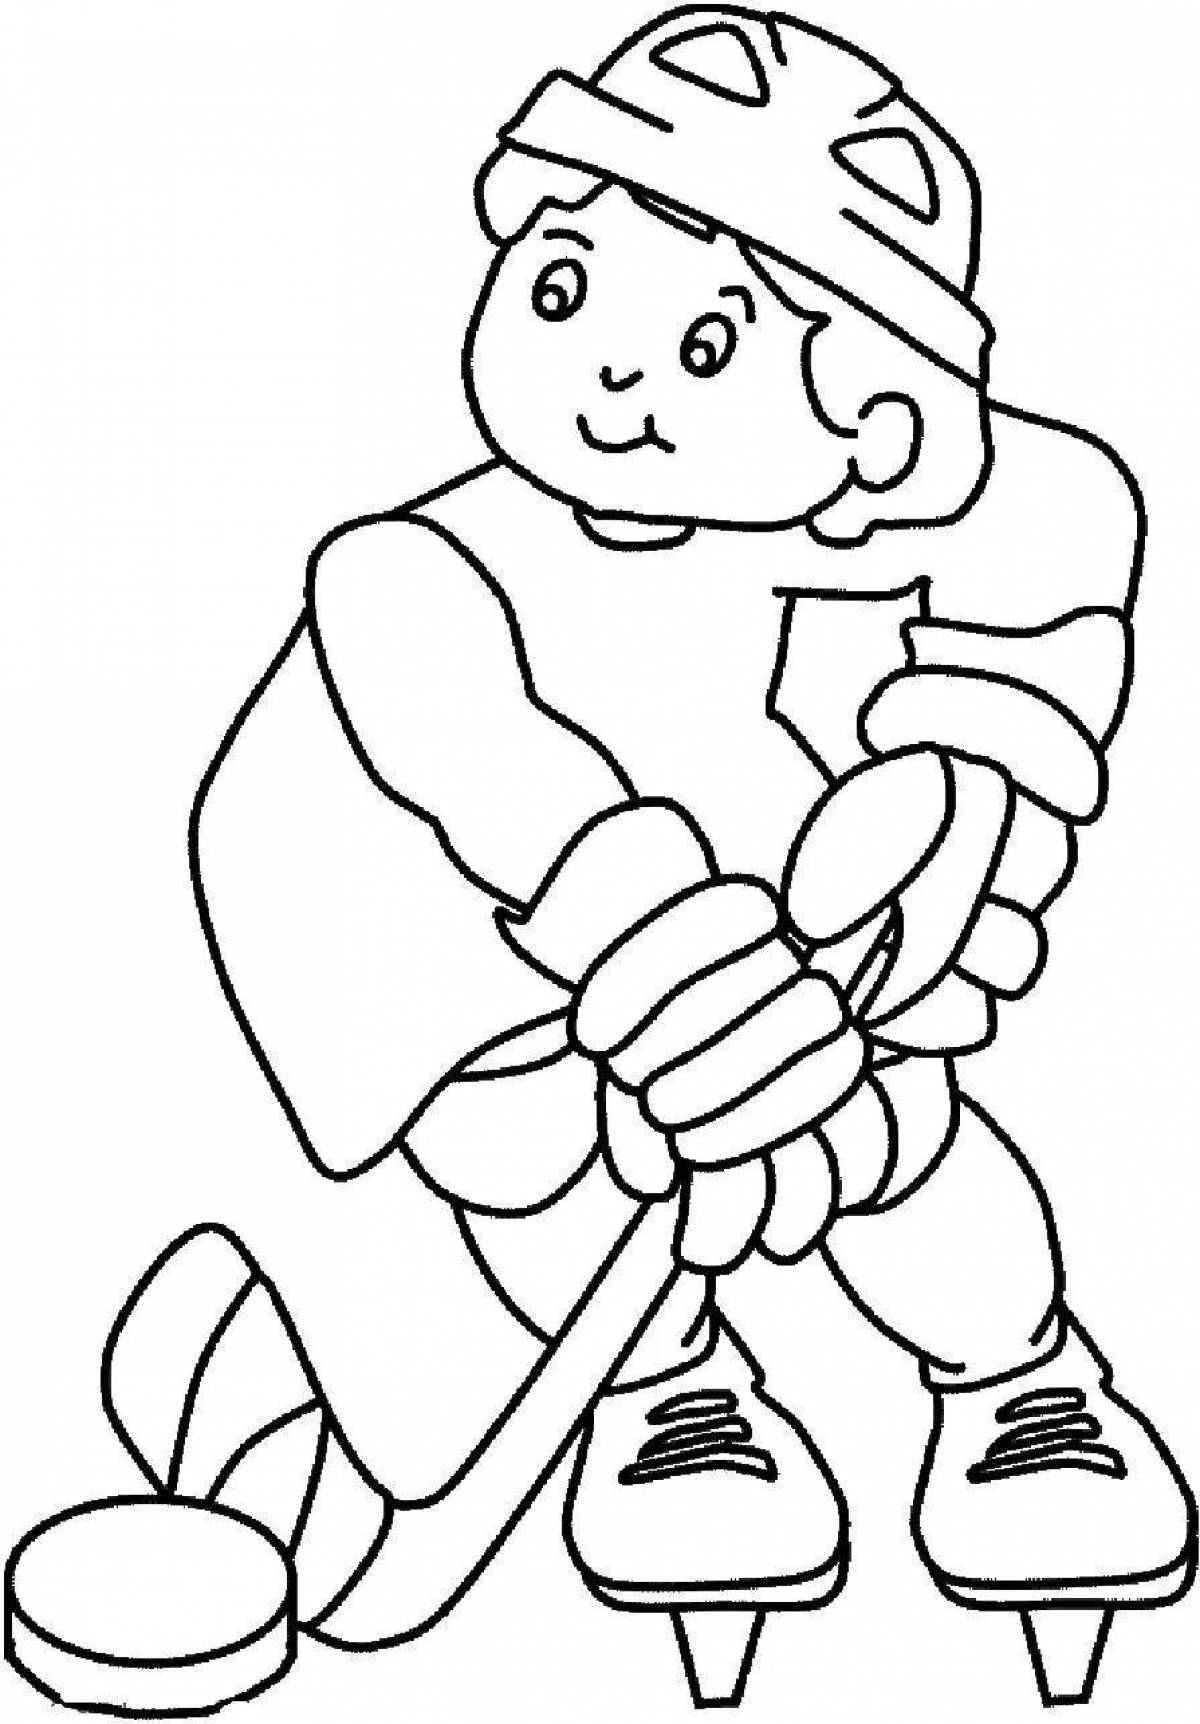 Great winter sports coloring book for students